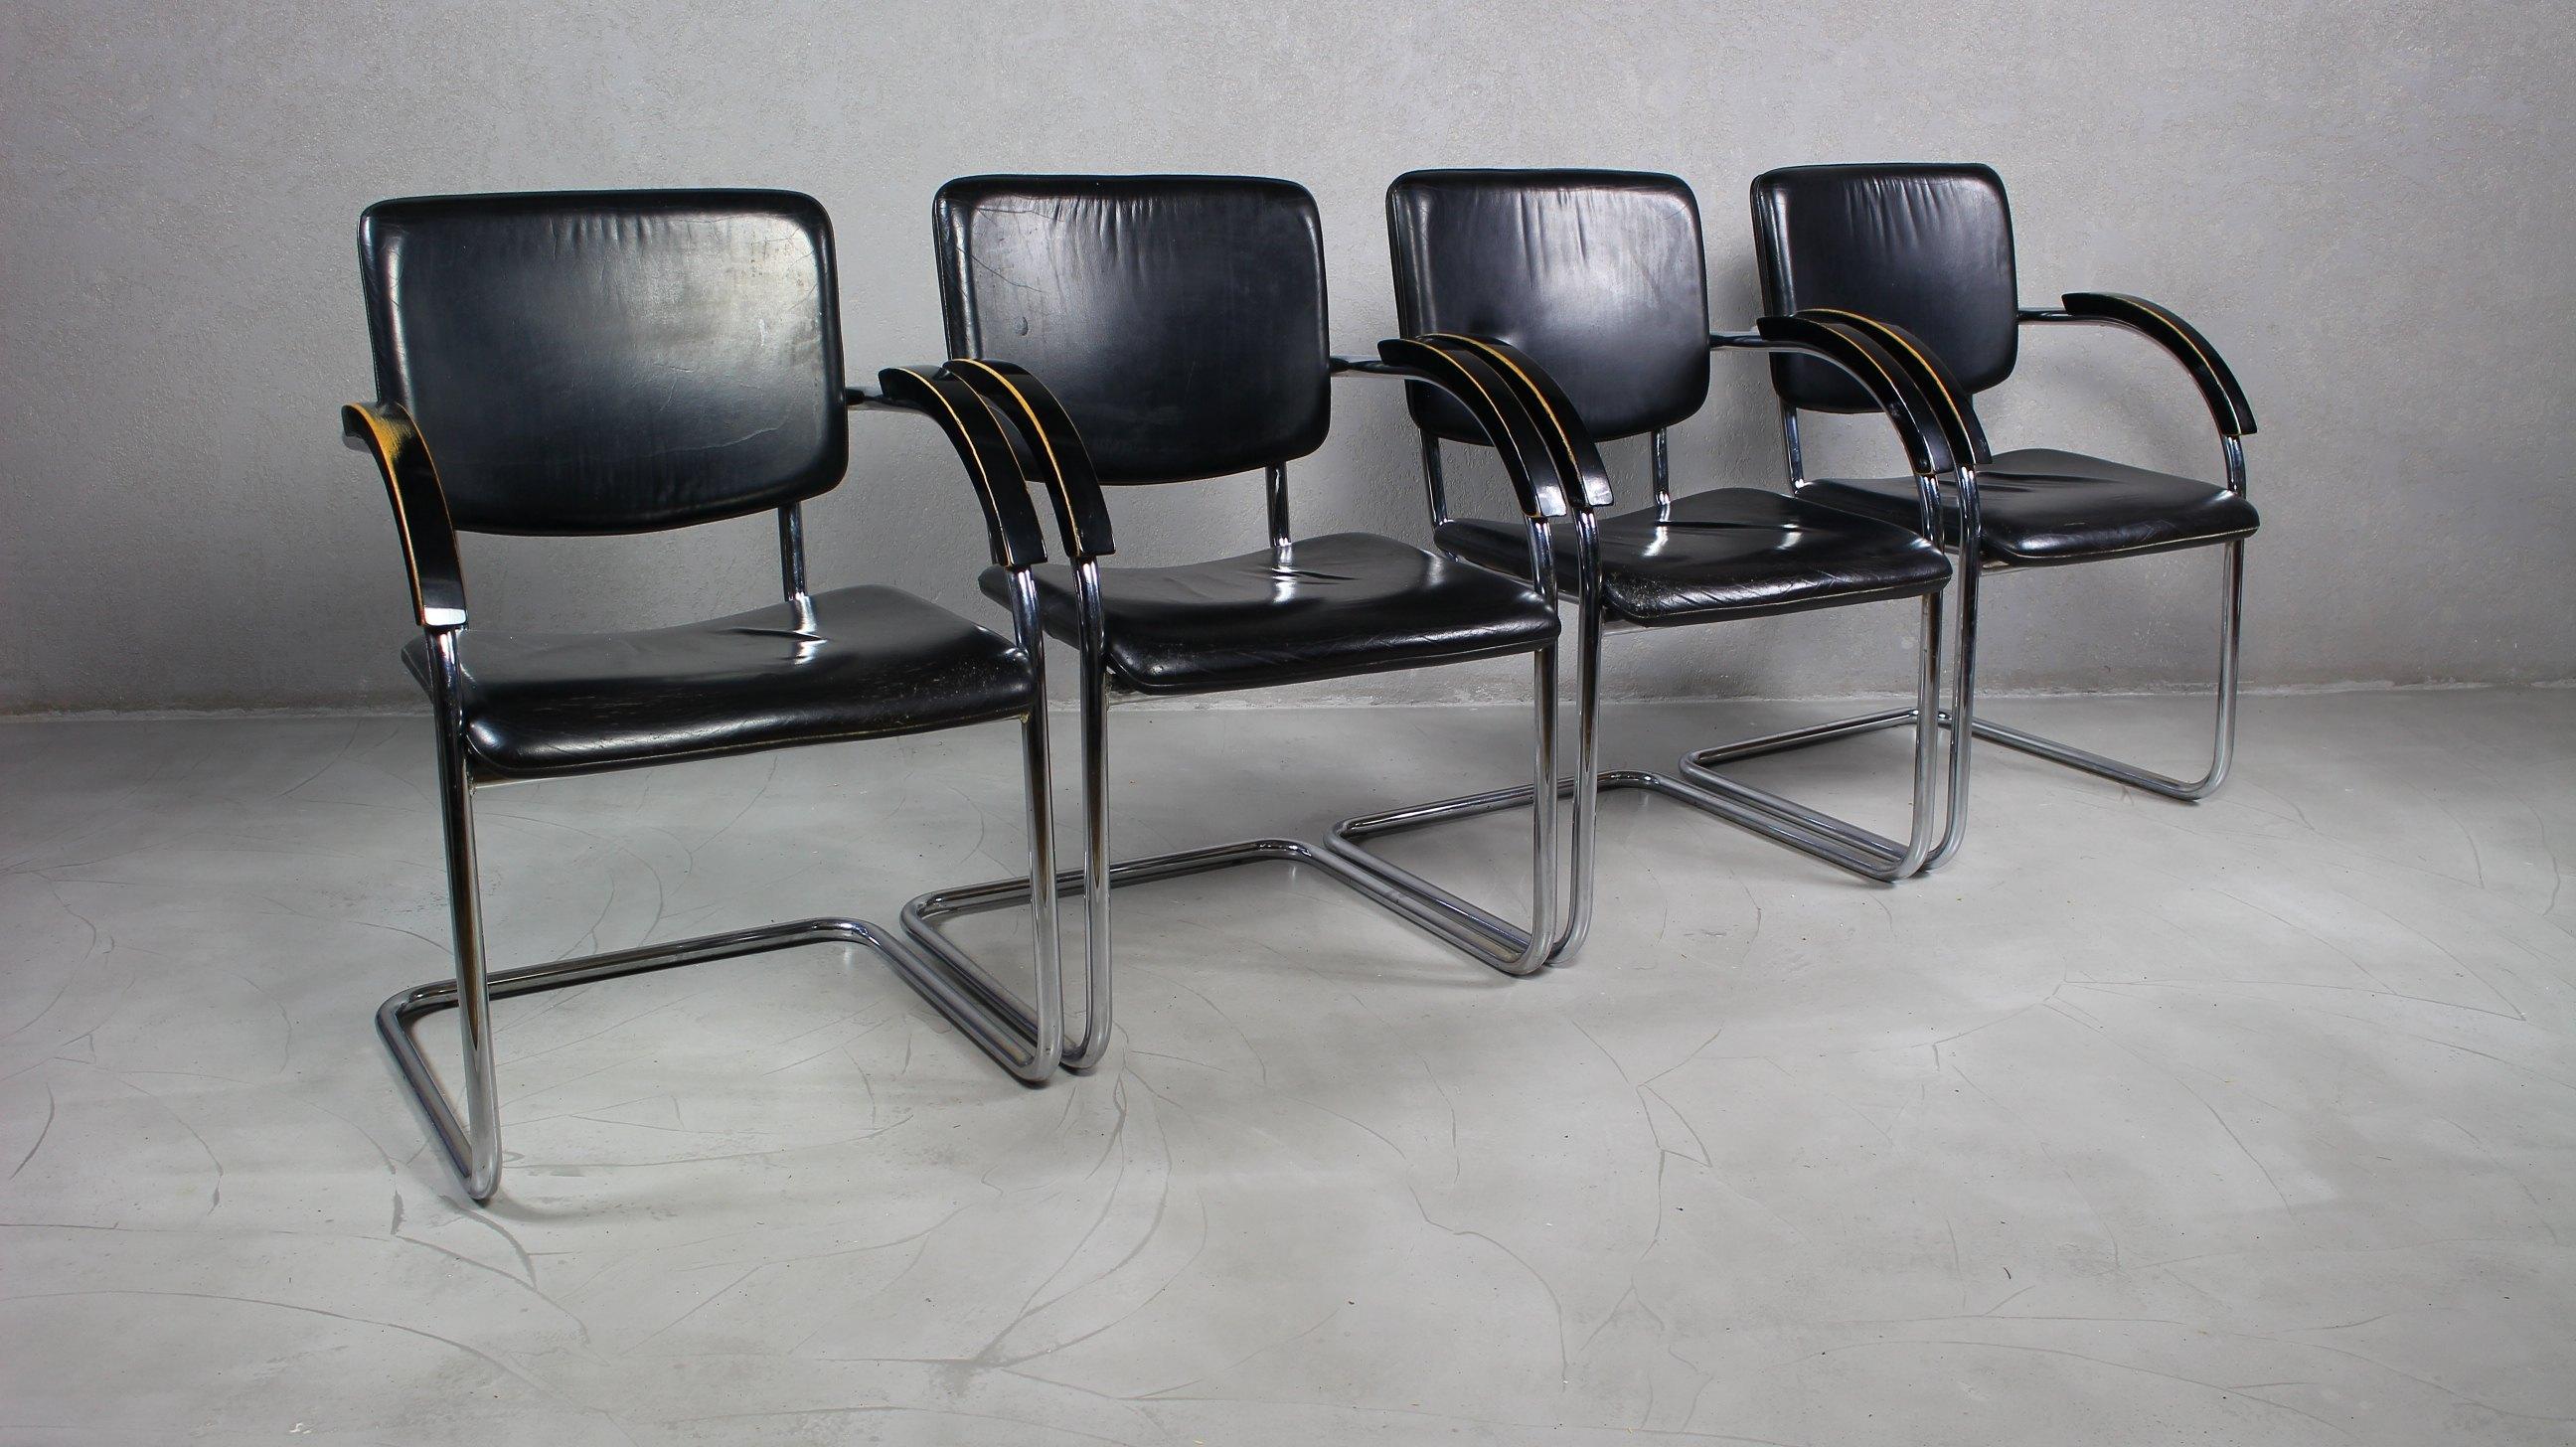 Tubular steel Bauhaus armchairs Circa 1940s. 
Tubular steel frames with faux leather.
Varnished wooden armrests.
Stable structure, the leather has scratches and abrasions.